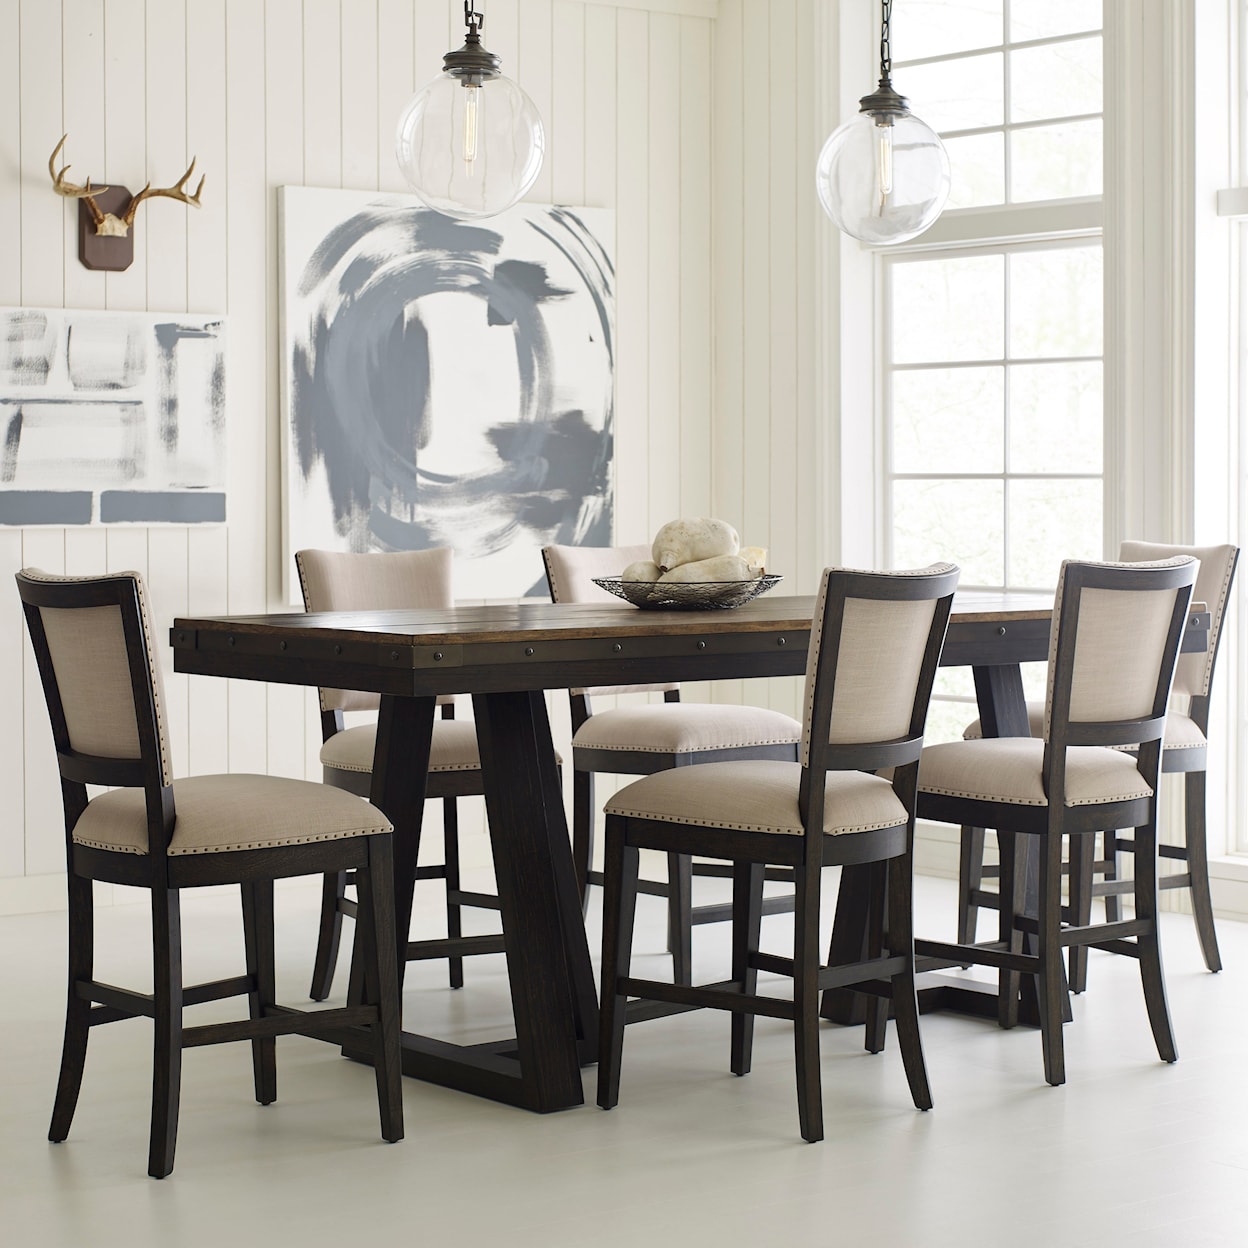 Kincaid Furniture Plank Road 7 Pc Counter Height Dining Set